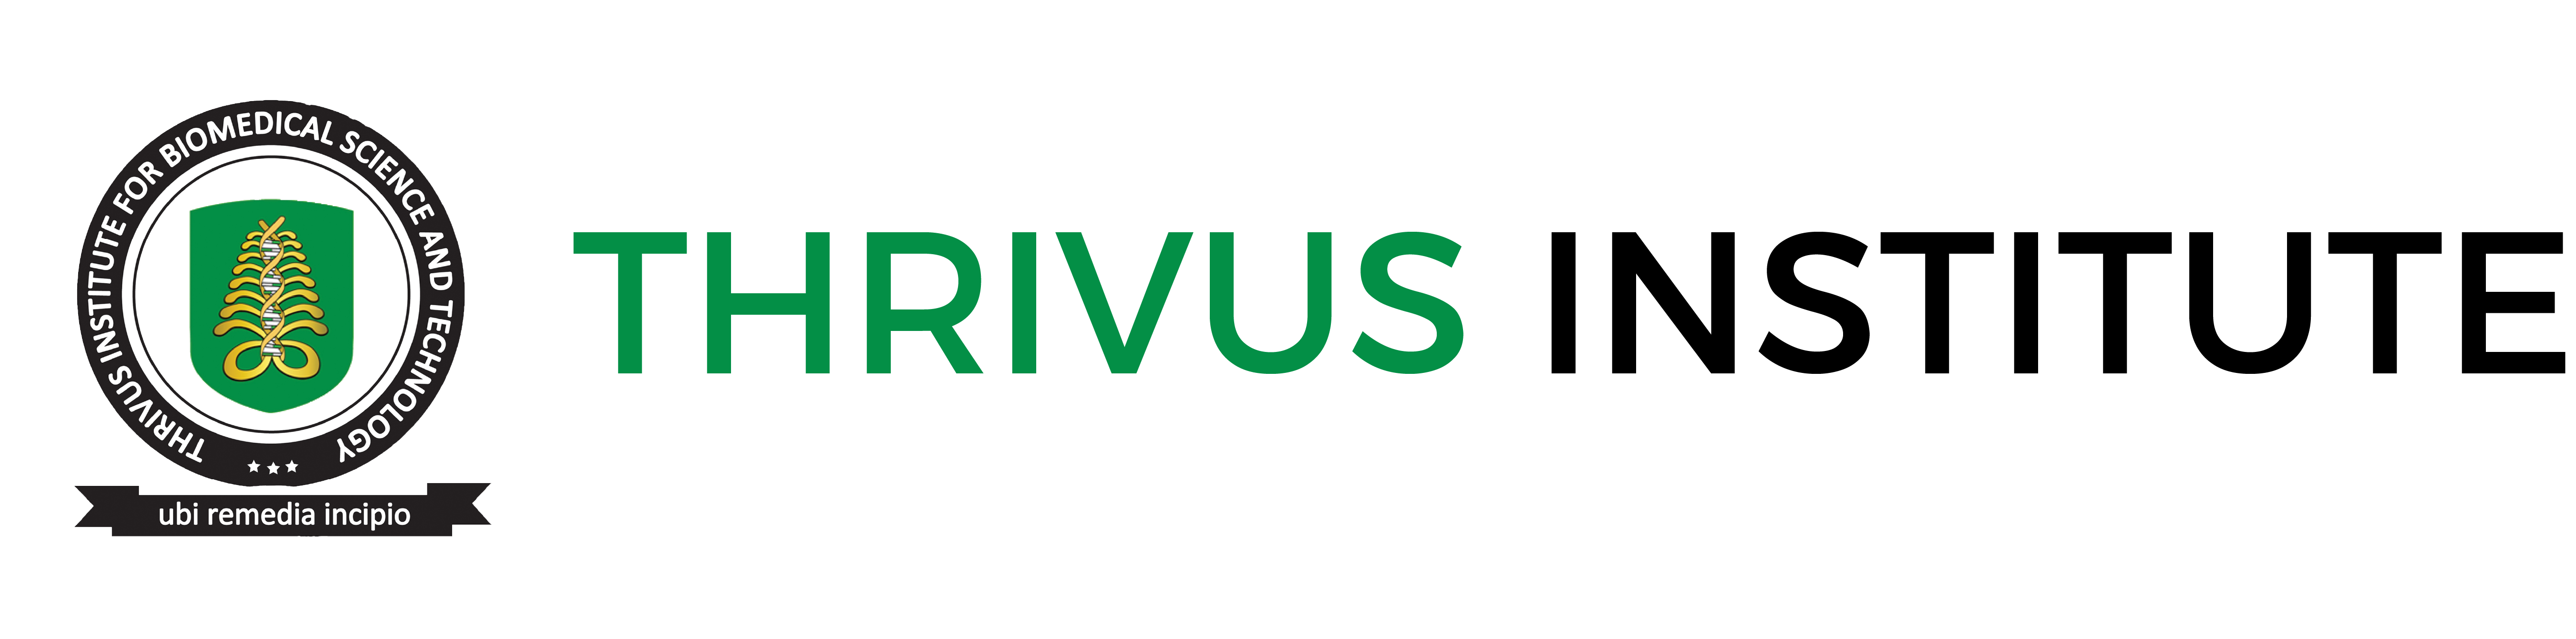 Thrivus Institute for Biomedical Science & Technology